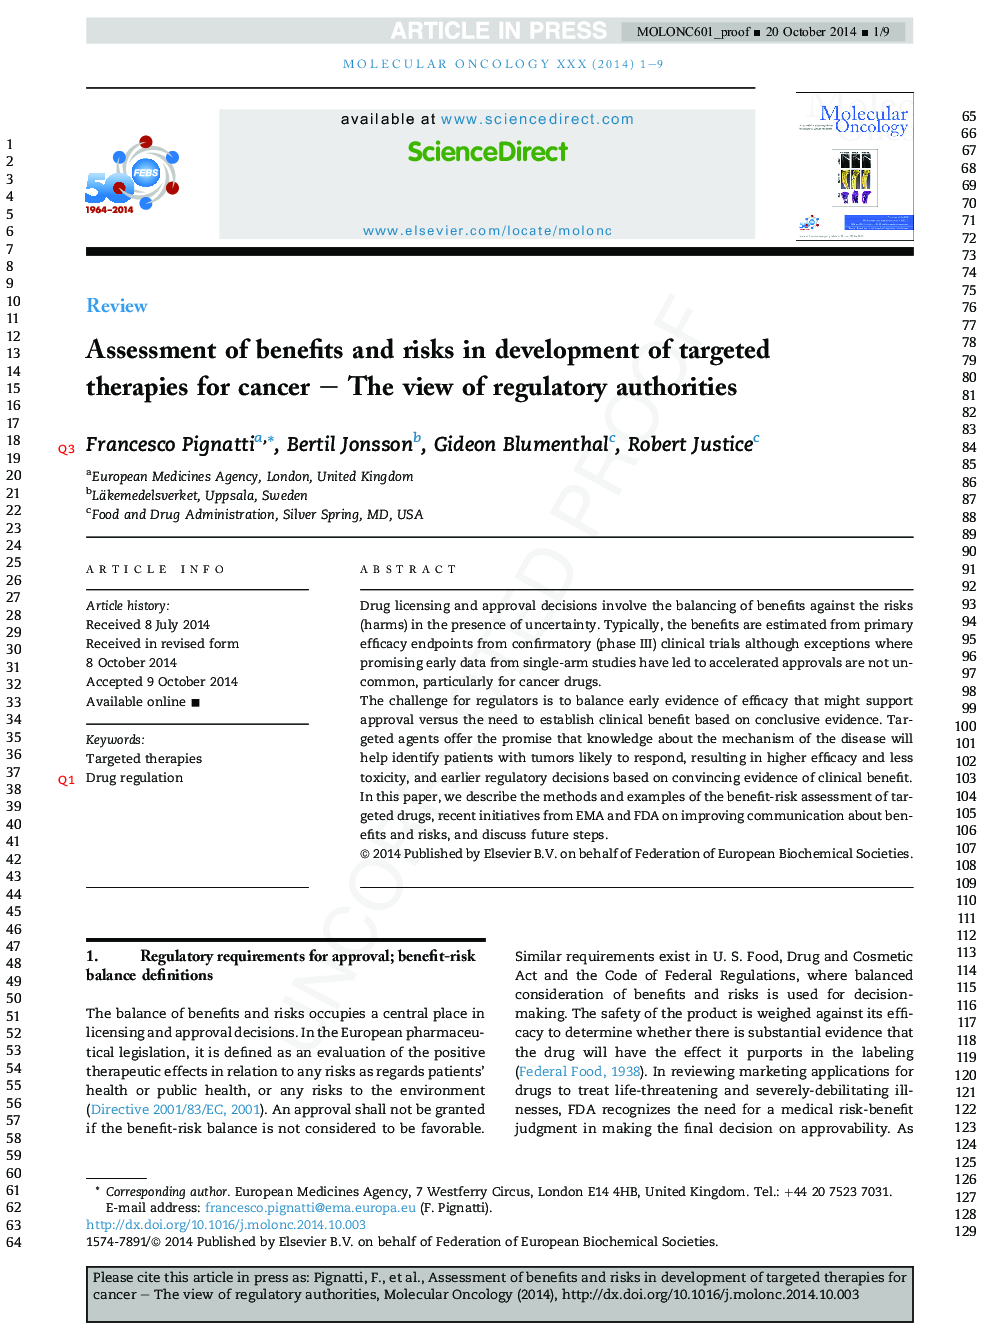 Assessment of benefits and risks in development of targeted therapies for cancer - The view of regulatory authorities